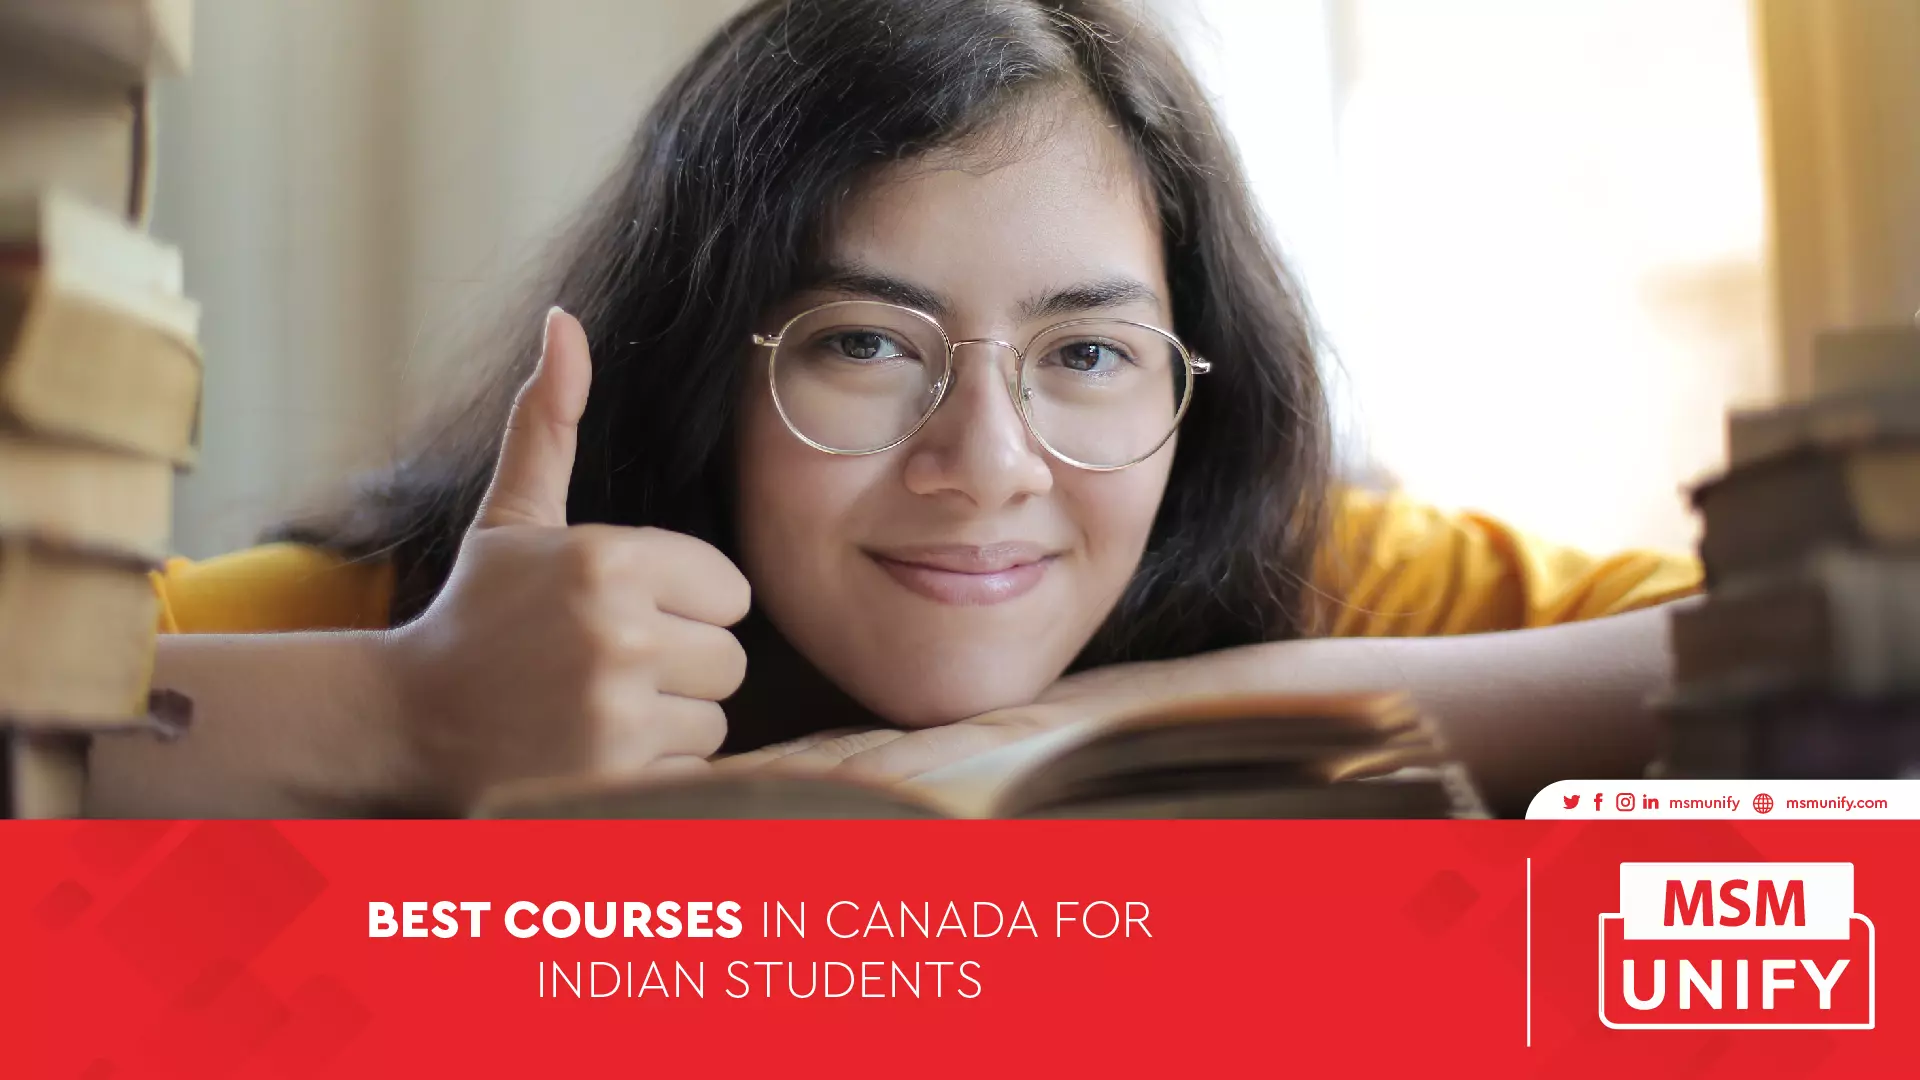 111722 MSM Unify Best Courses in Canada for Indian Students 01